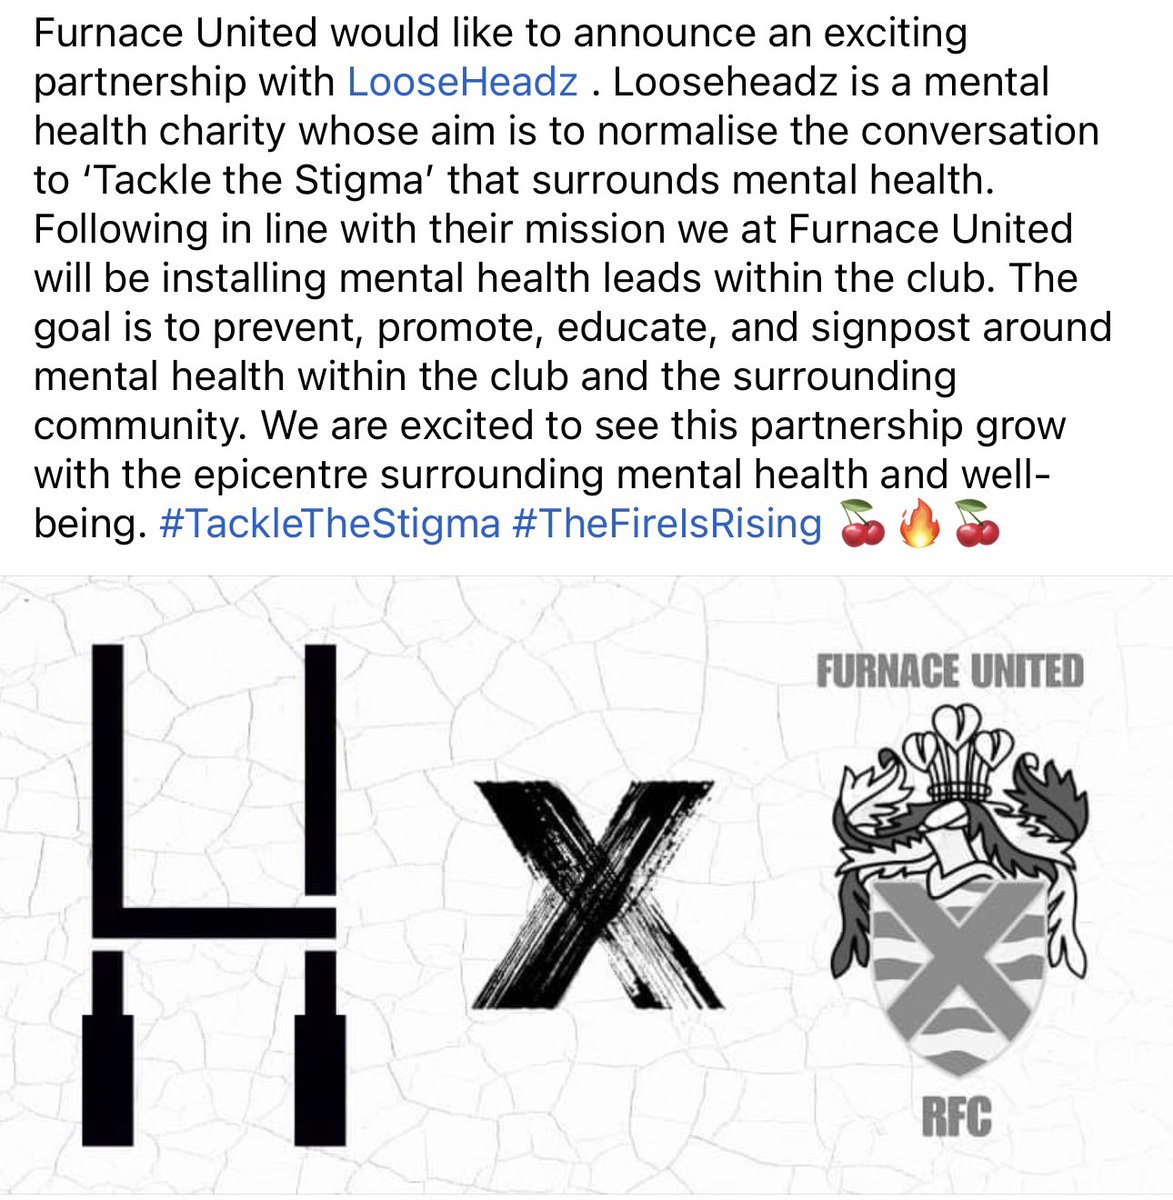 The club are honoured to announce their partnership with @LooseHeadz Mental Health charity. #TackleTheStigma #TheFireIsRising 🍒🔥🍒